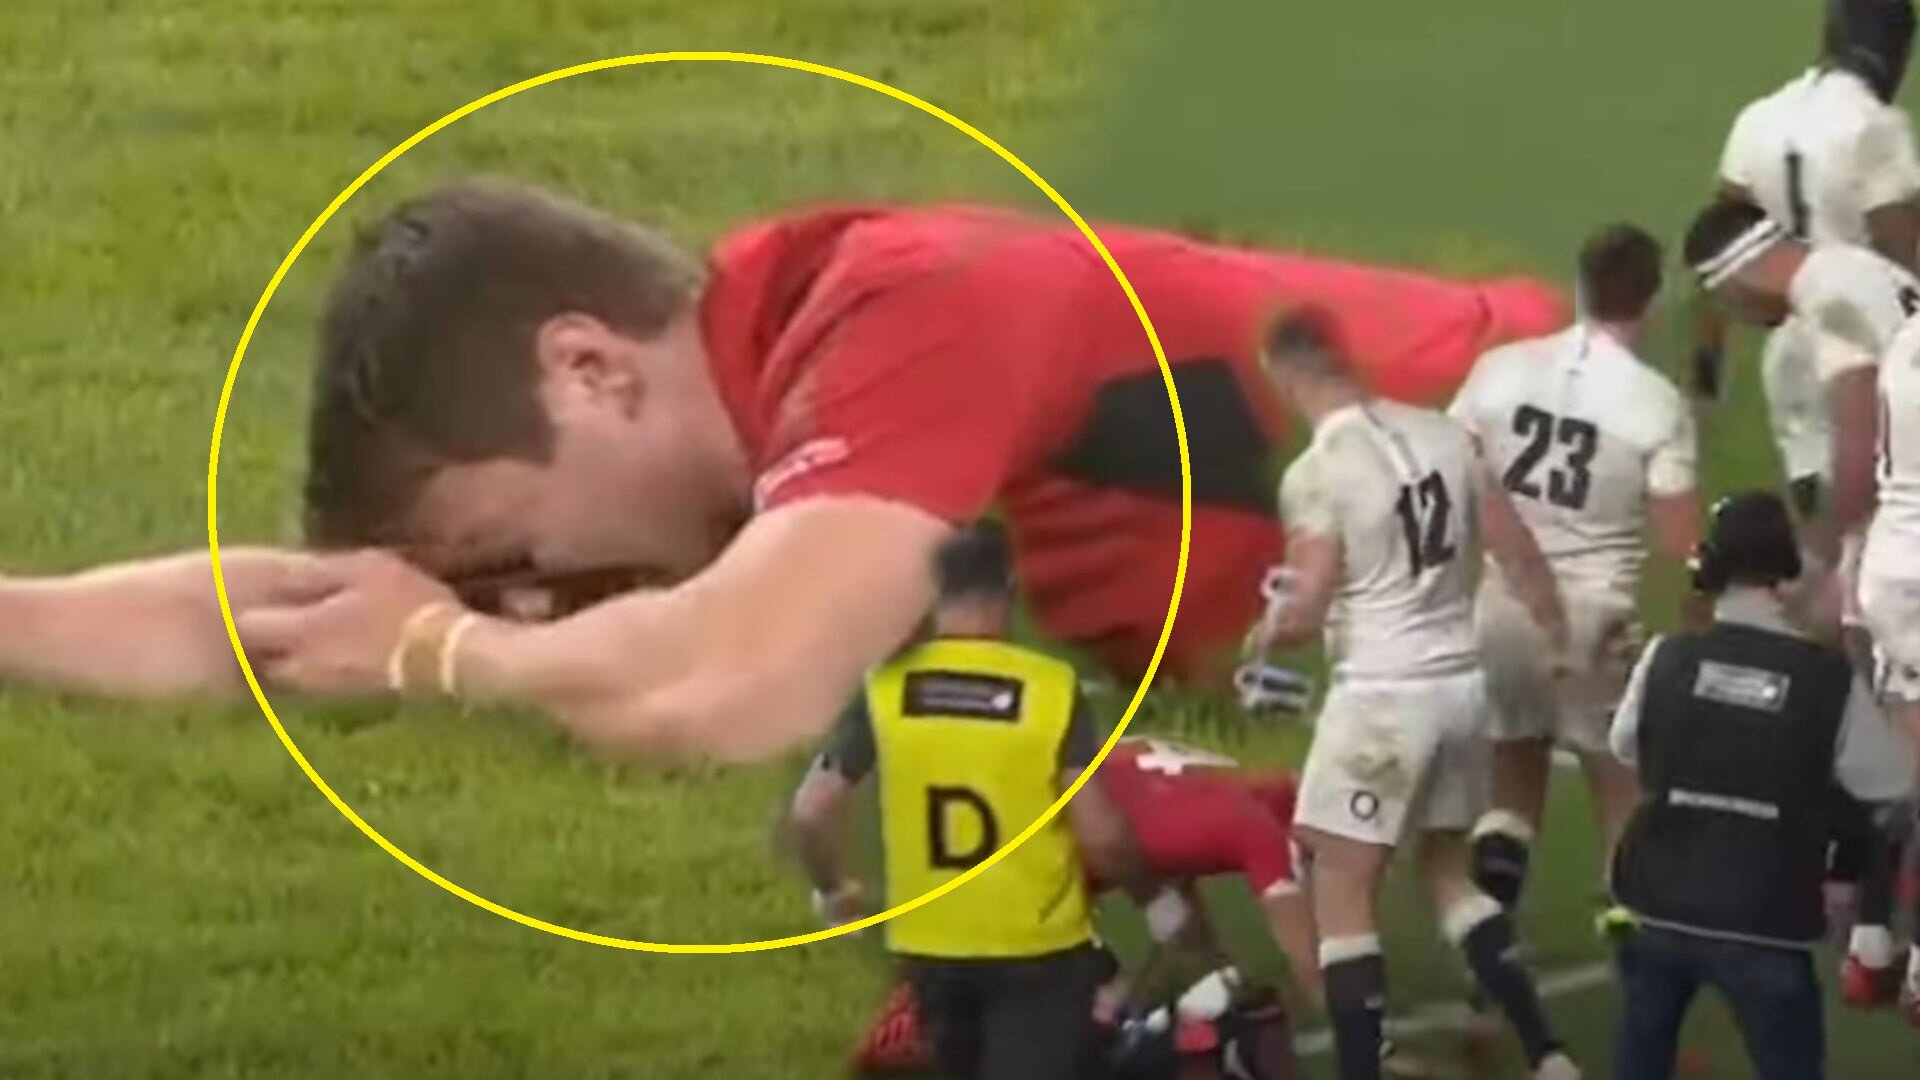 The most violent red card incidents in Six Nations history